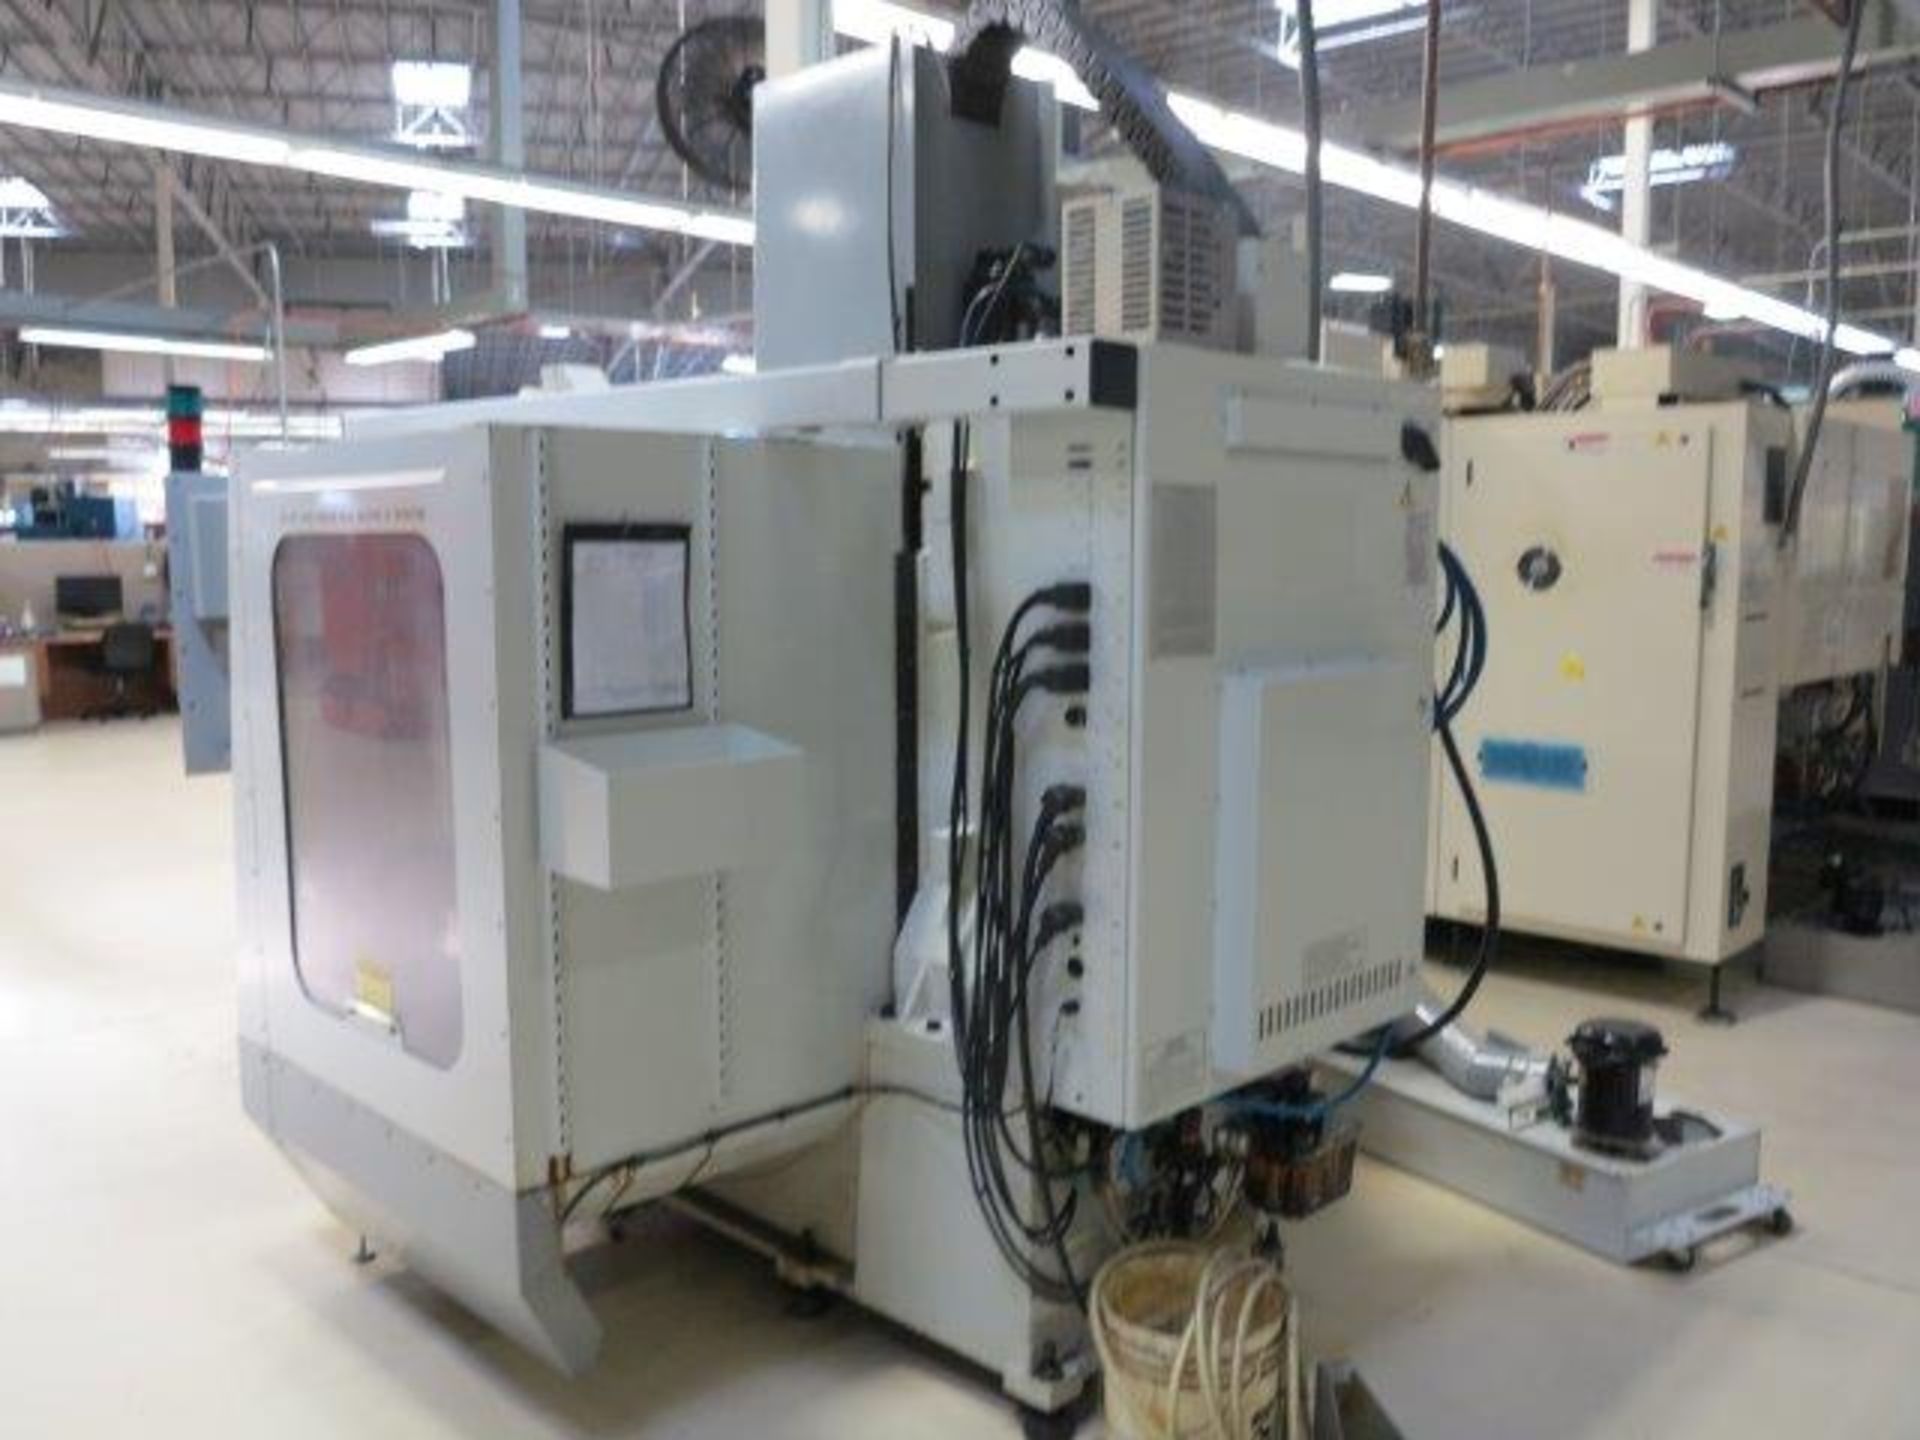 2001 HAAS VF-2, TRAVELS: 30" X 16" X 20", 7500 RPM SPINDLE, CAT 40 TAPER, 20 STATION ATC, 15 HP, - Image 3 of 6